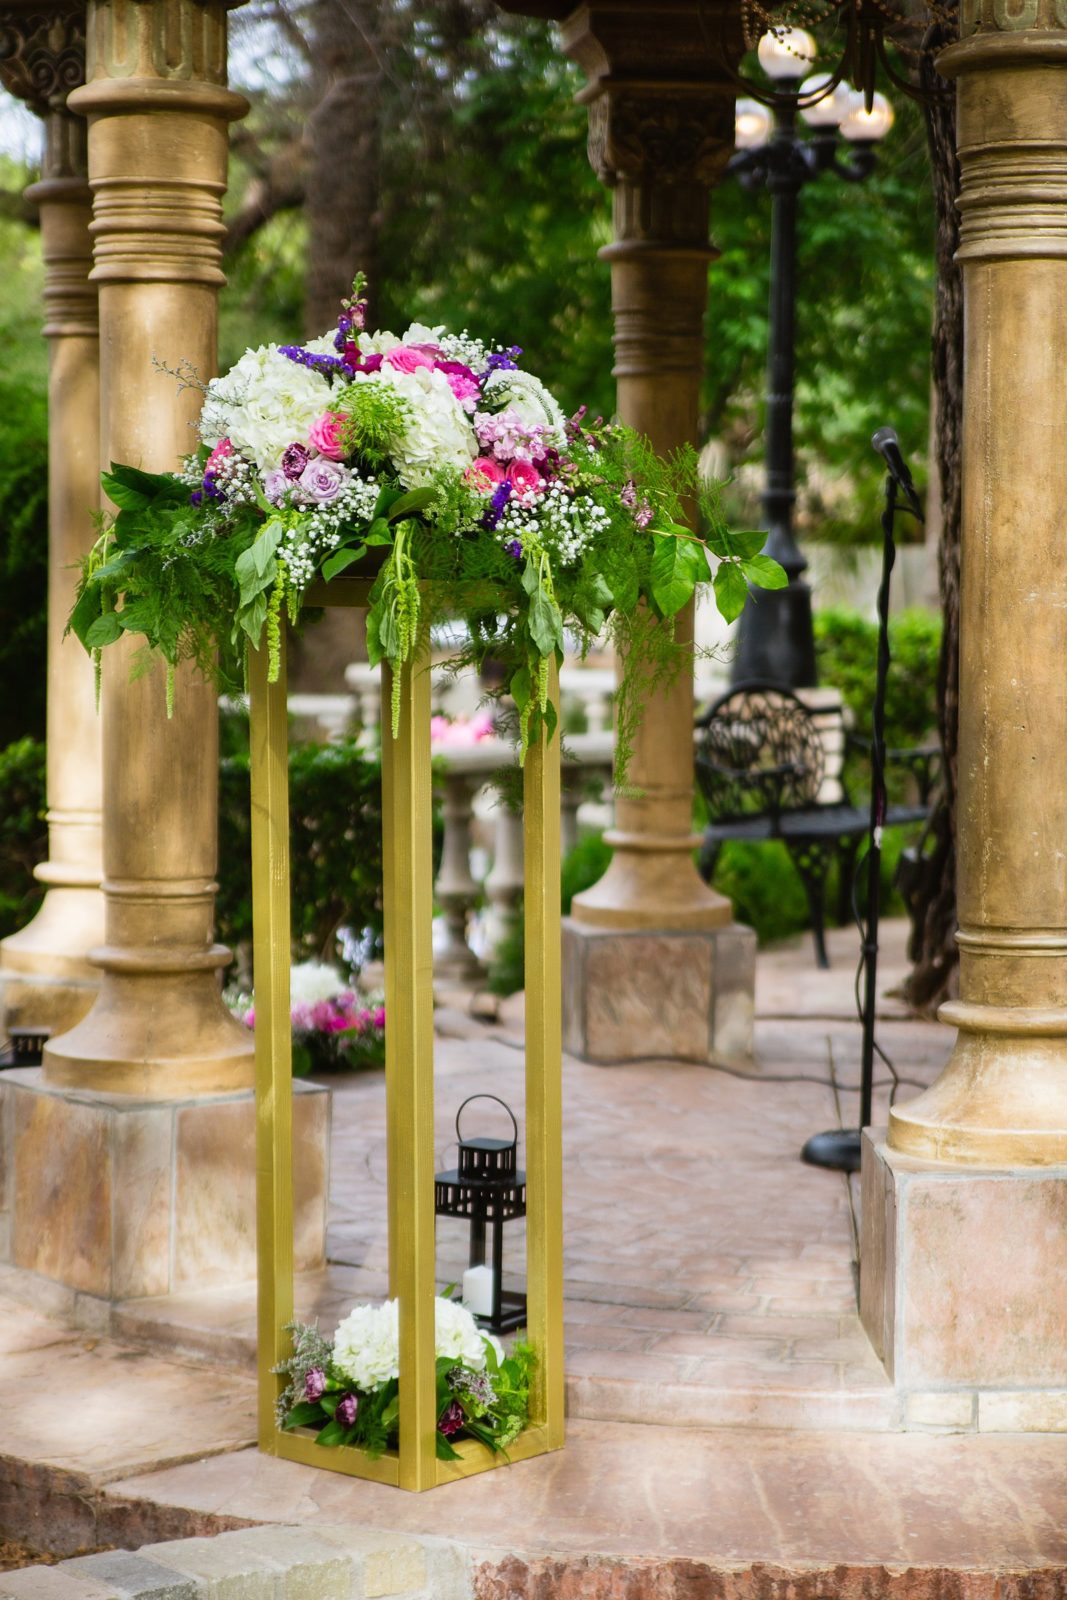 Wedding ceremony floral decor at a garden wedding at The Wright House Provencal by PMA Photography.